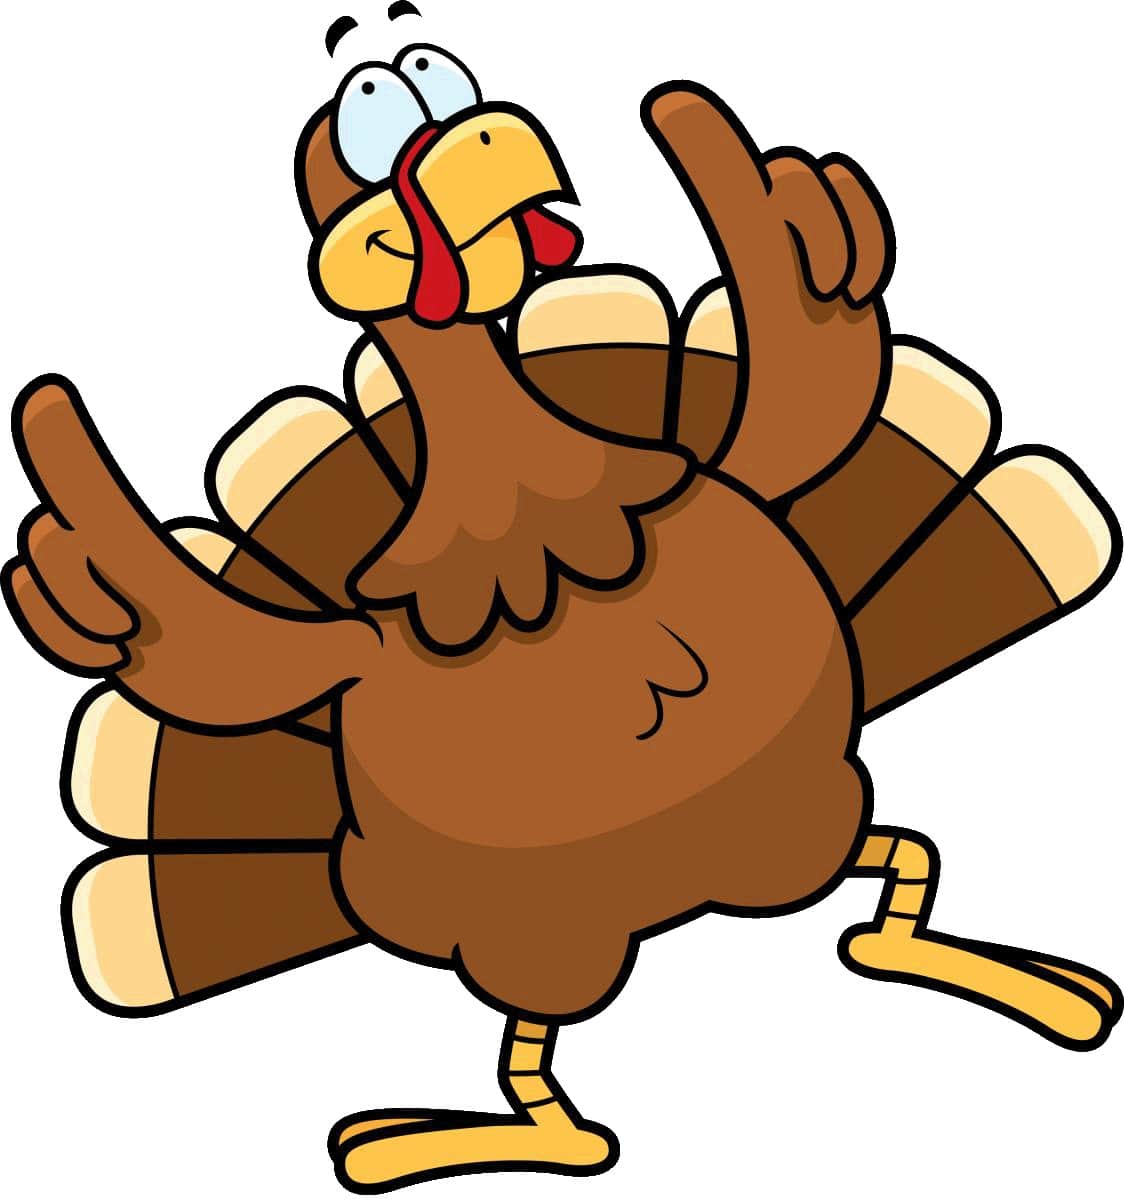 Cartoon, Animated Turkey Image for Thanksgiving Day 2021